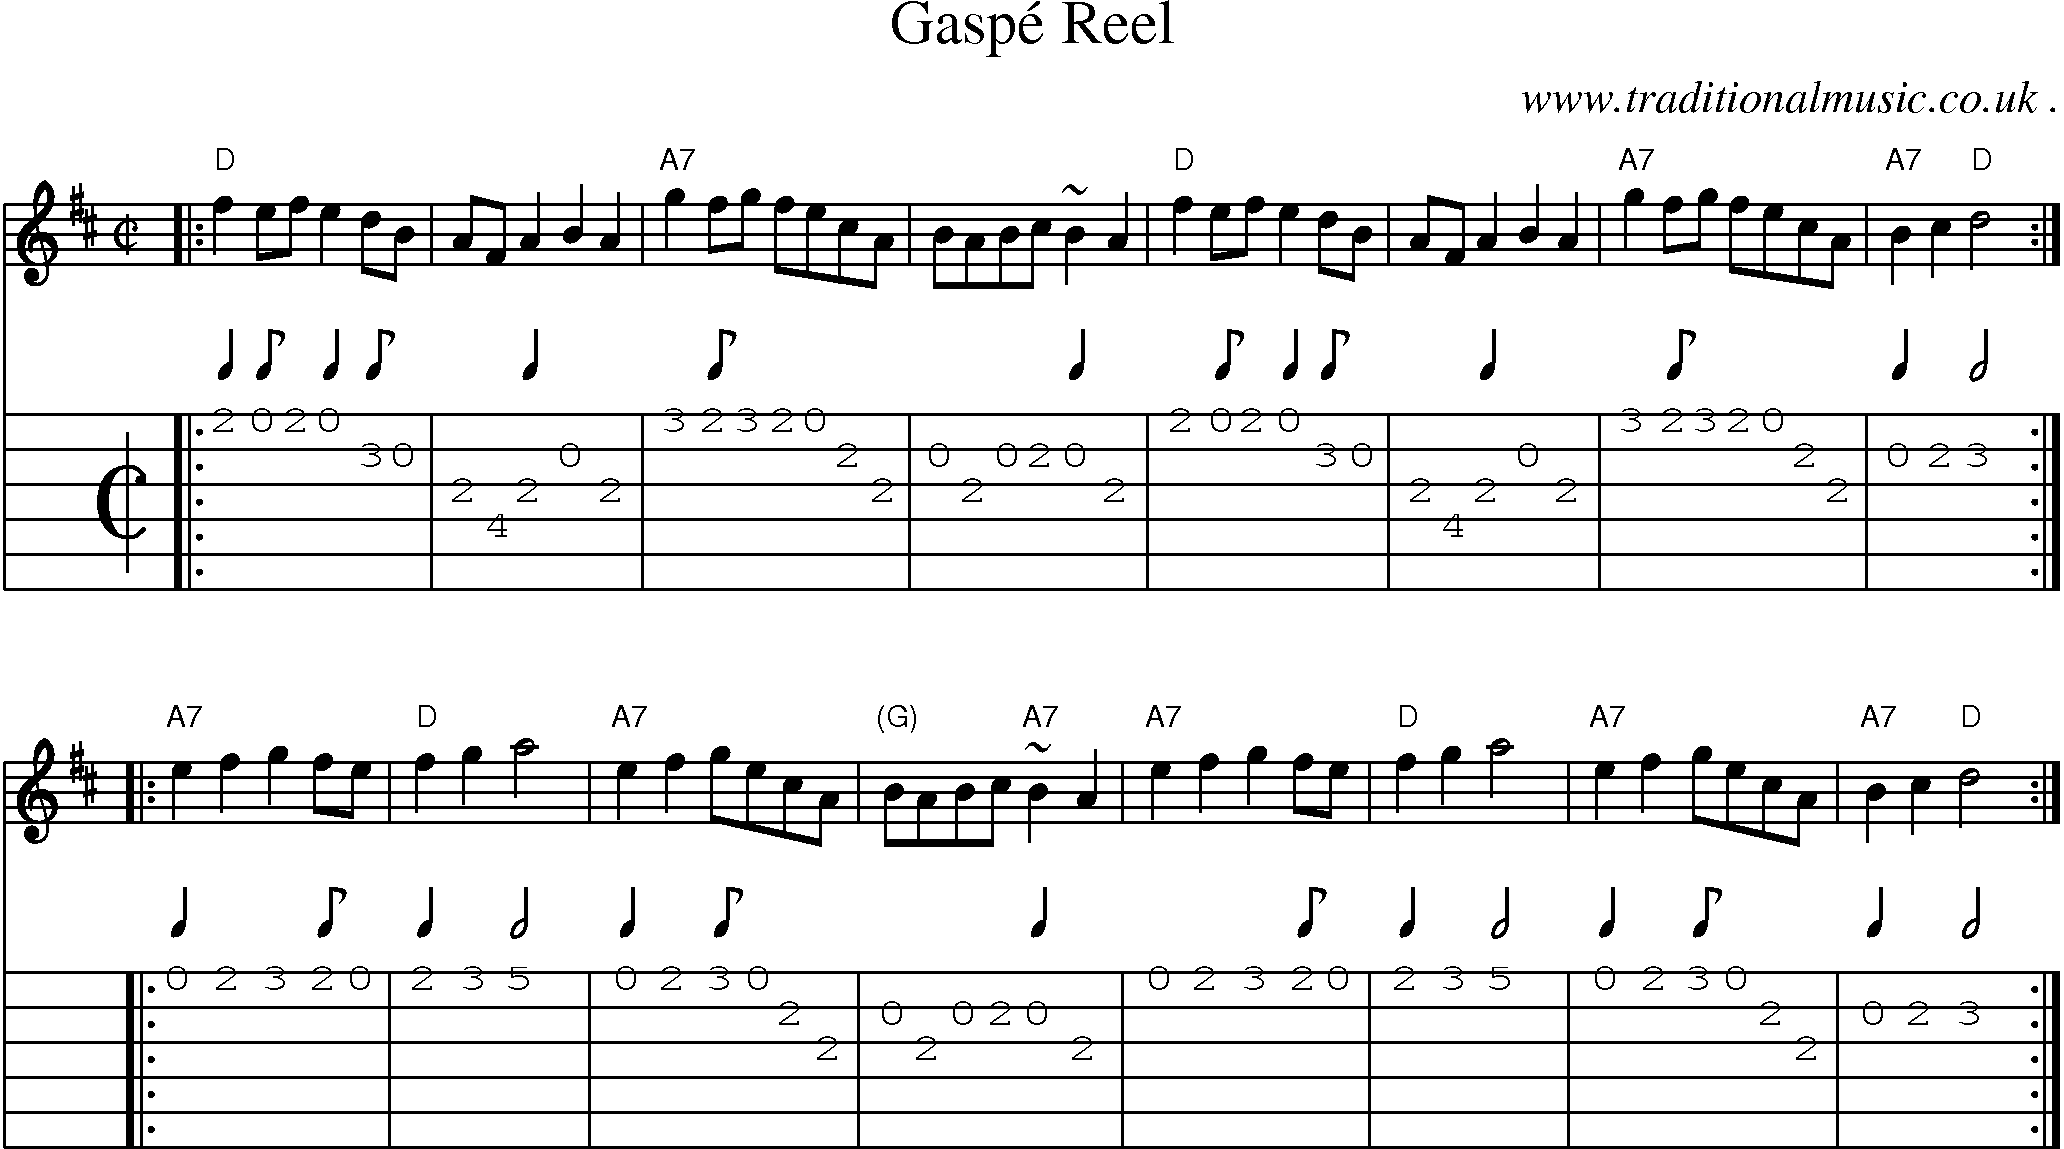 Sheet-music  score, Chords and Guitar Tabs for Gaspe Reel